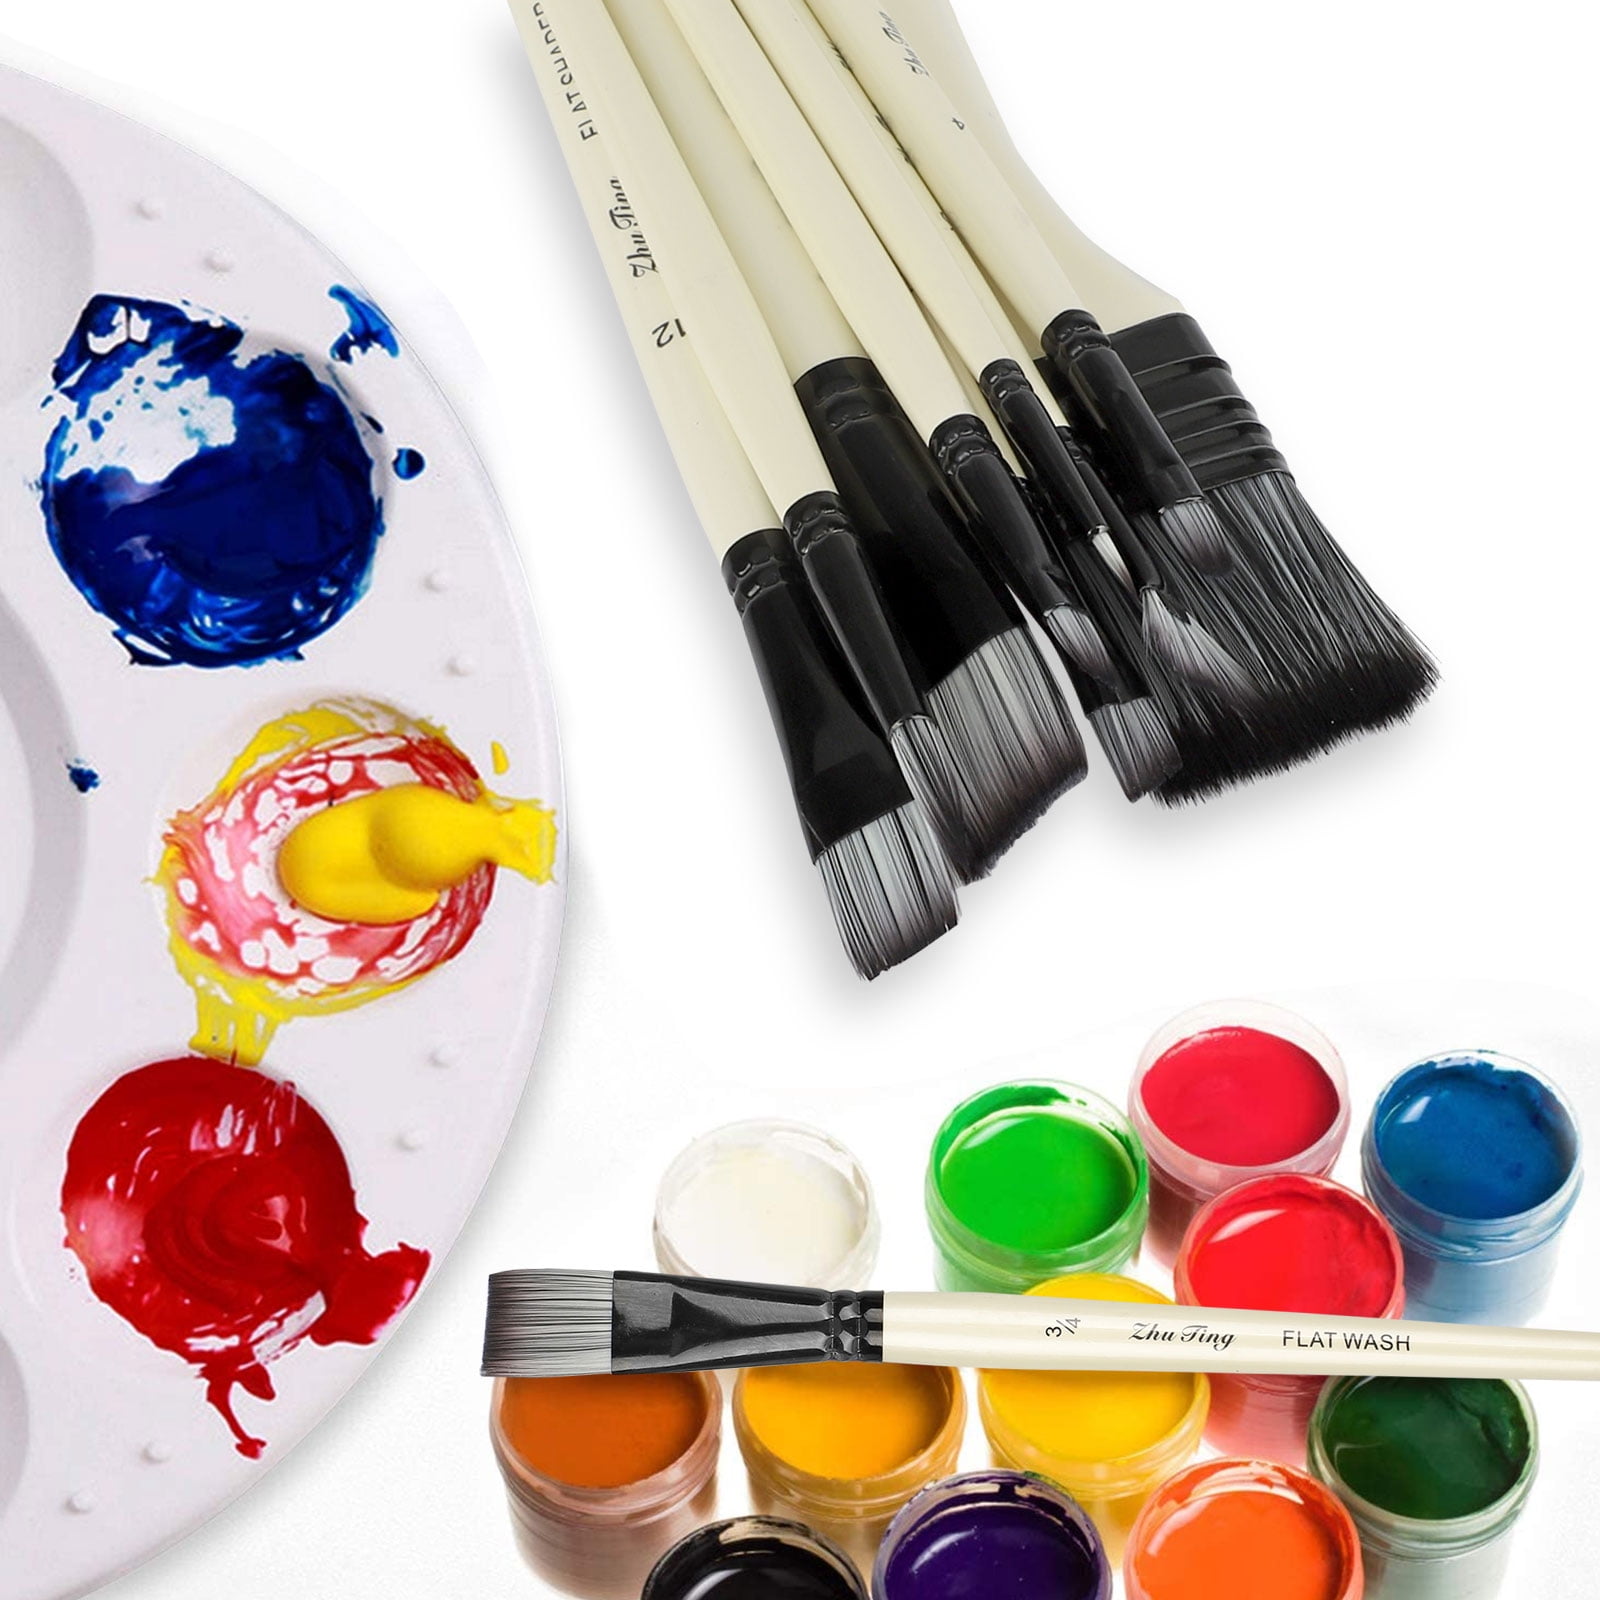 Complete Set of 30 Art Paint Brushes for Kids by Glokers - Variety of  Paintbrushes for Watercolor, Oil, Acrylic & Tempera Paints - Kids Art  Supplies Perfect for Ages 3+ 